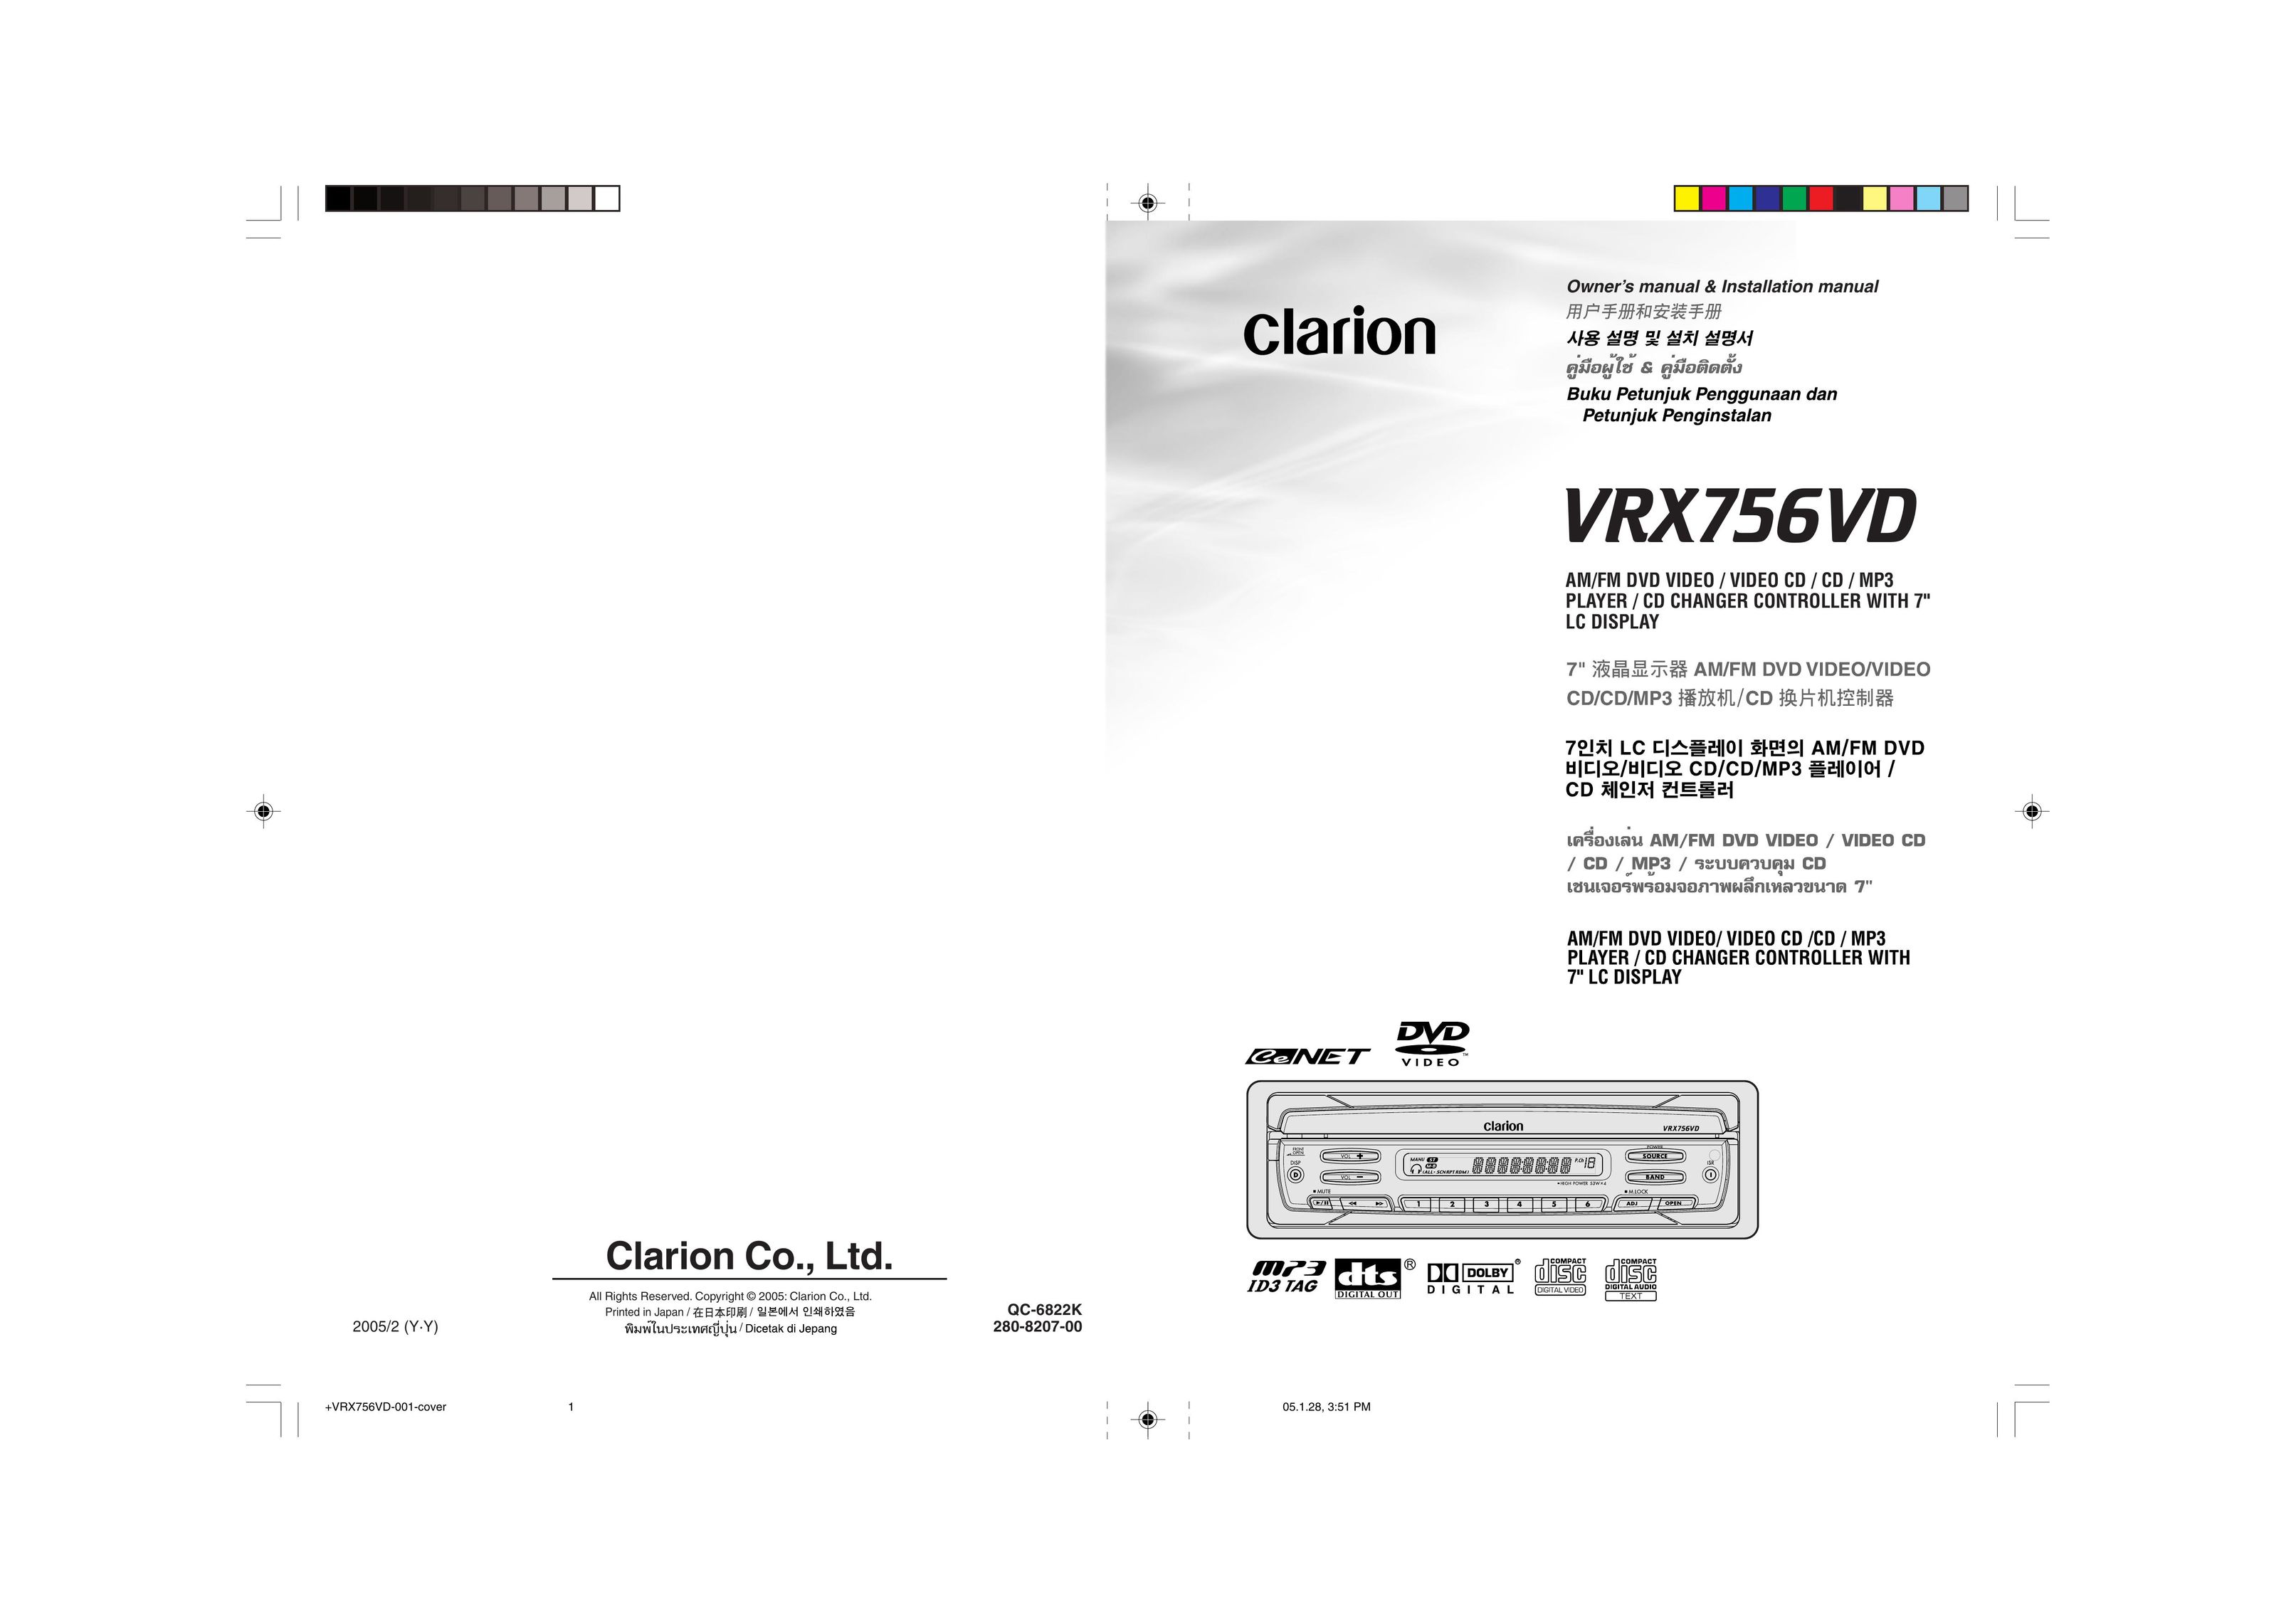 Clarion VRX756VD DVD Player User Manual